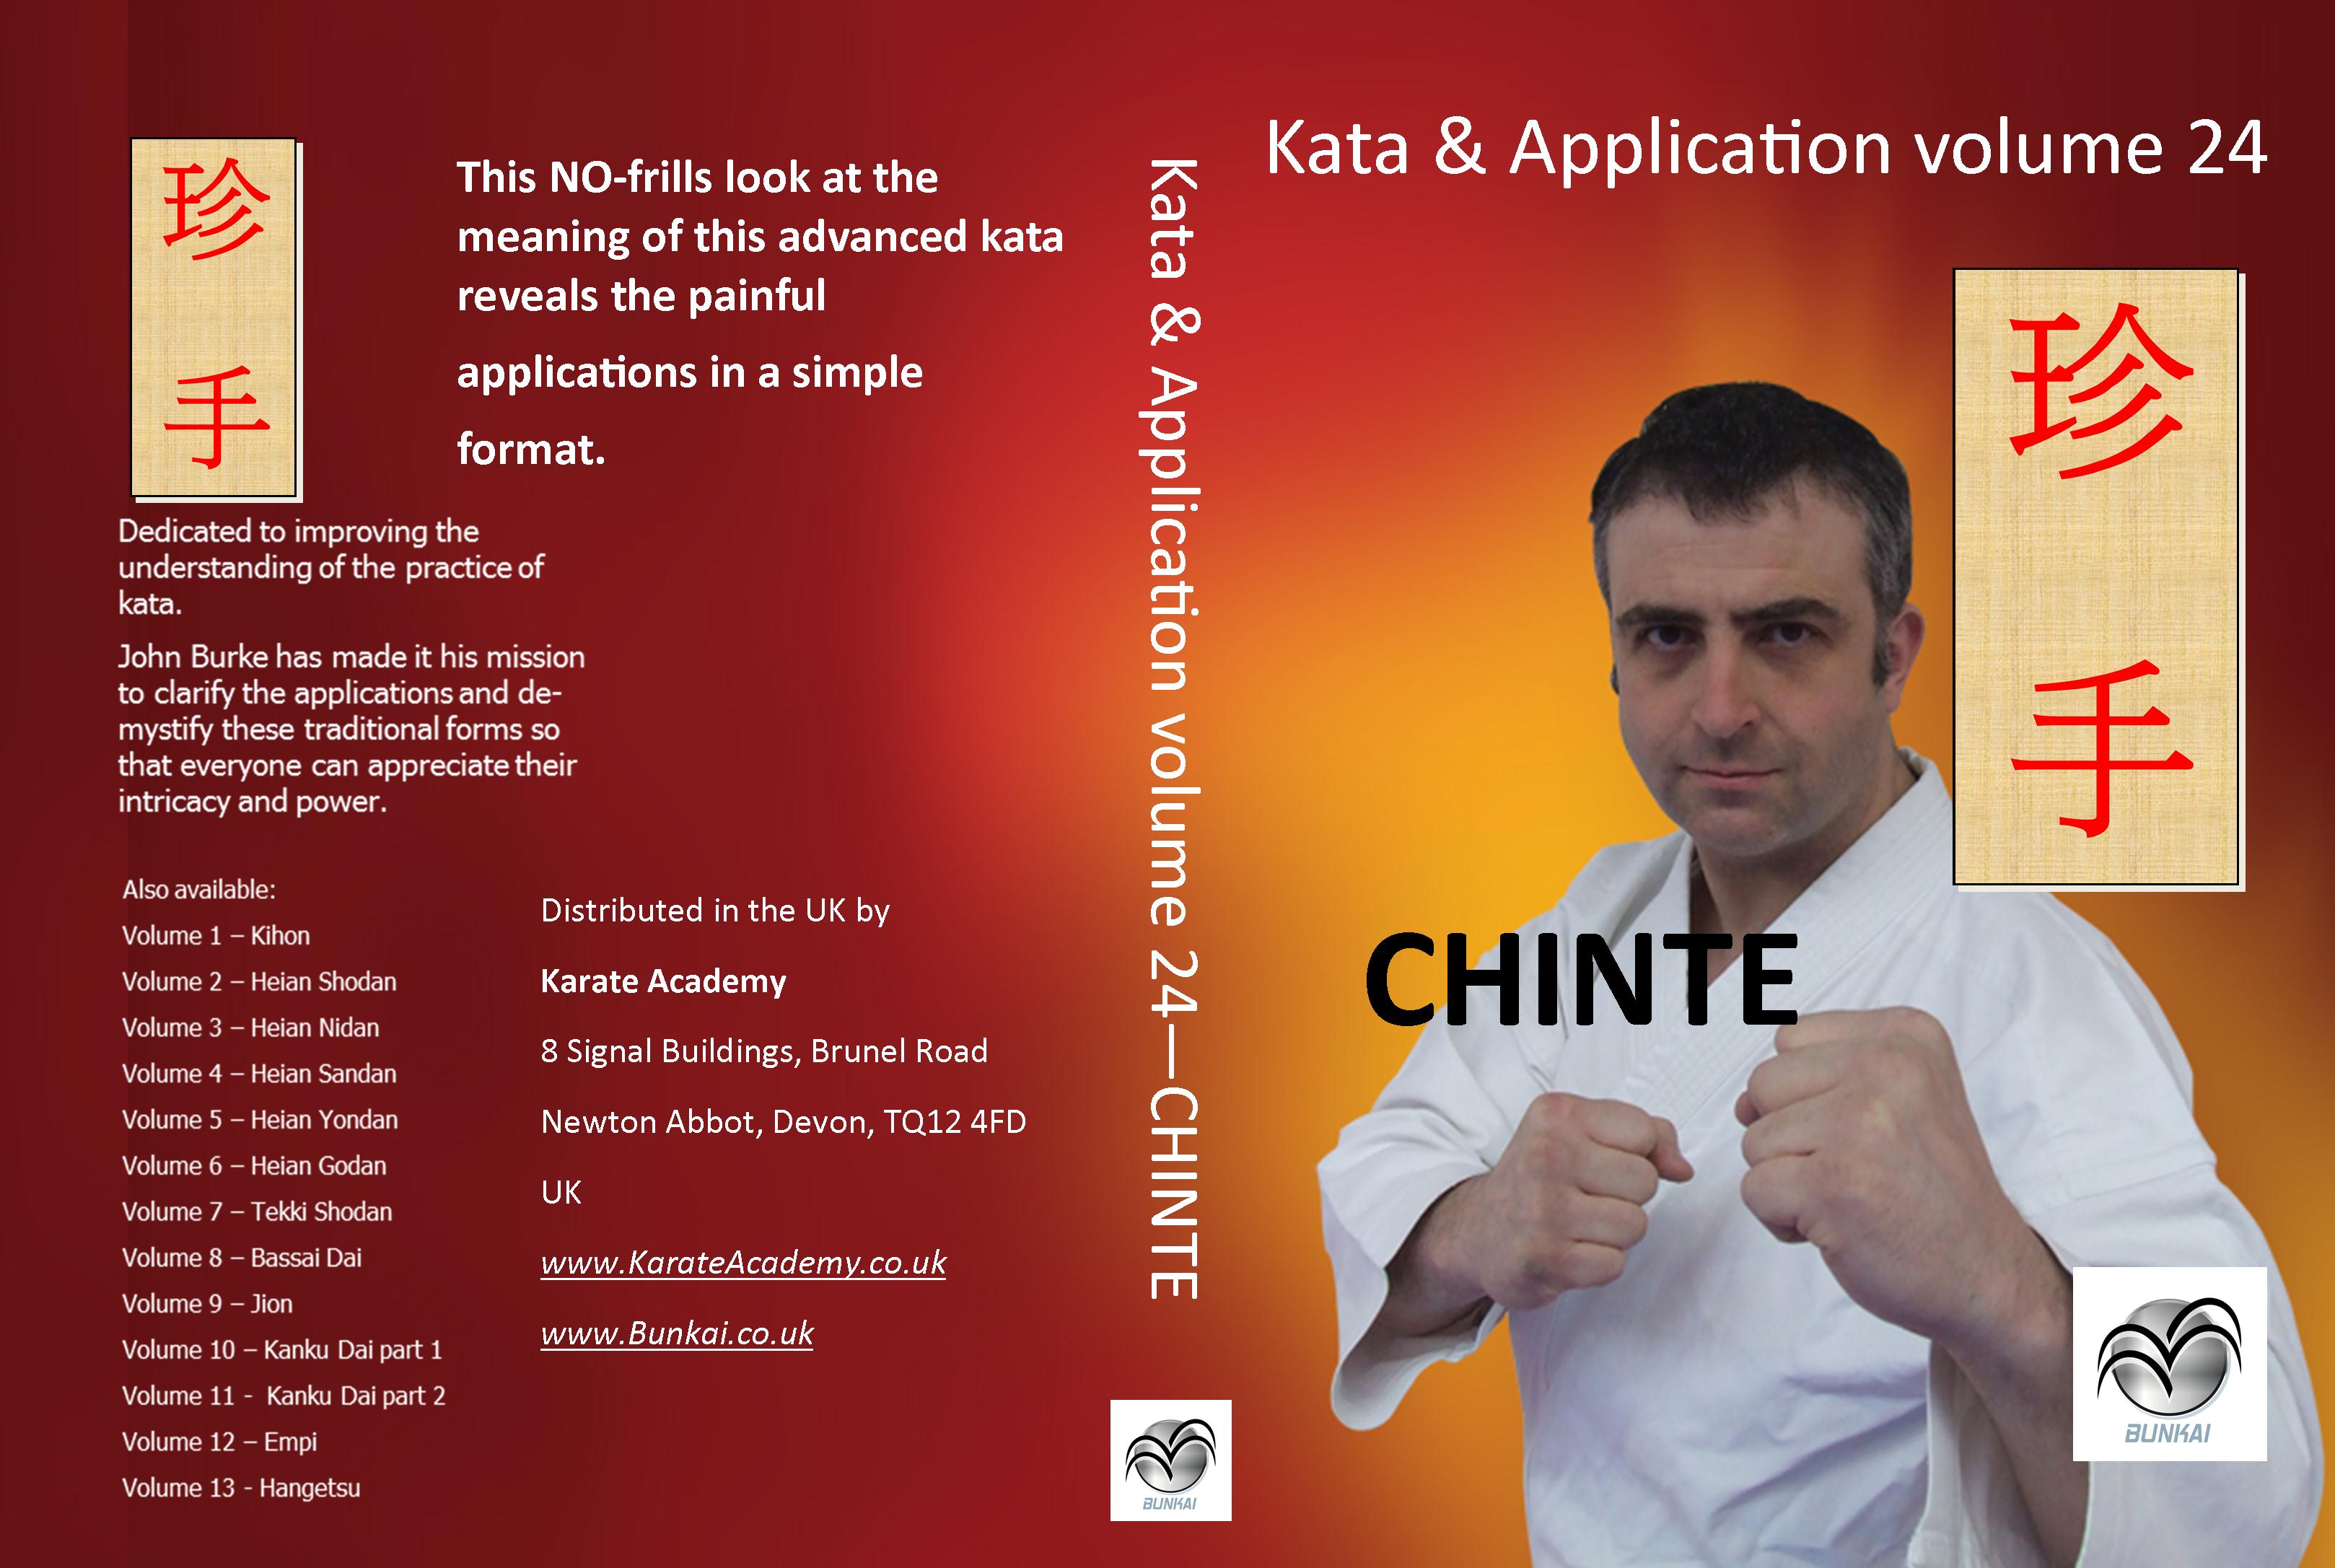 CHINTE APPLICATIONS VIDEO